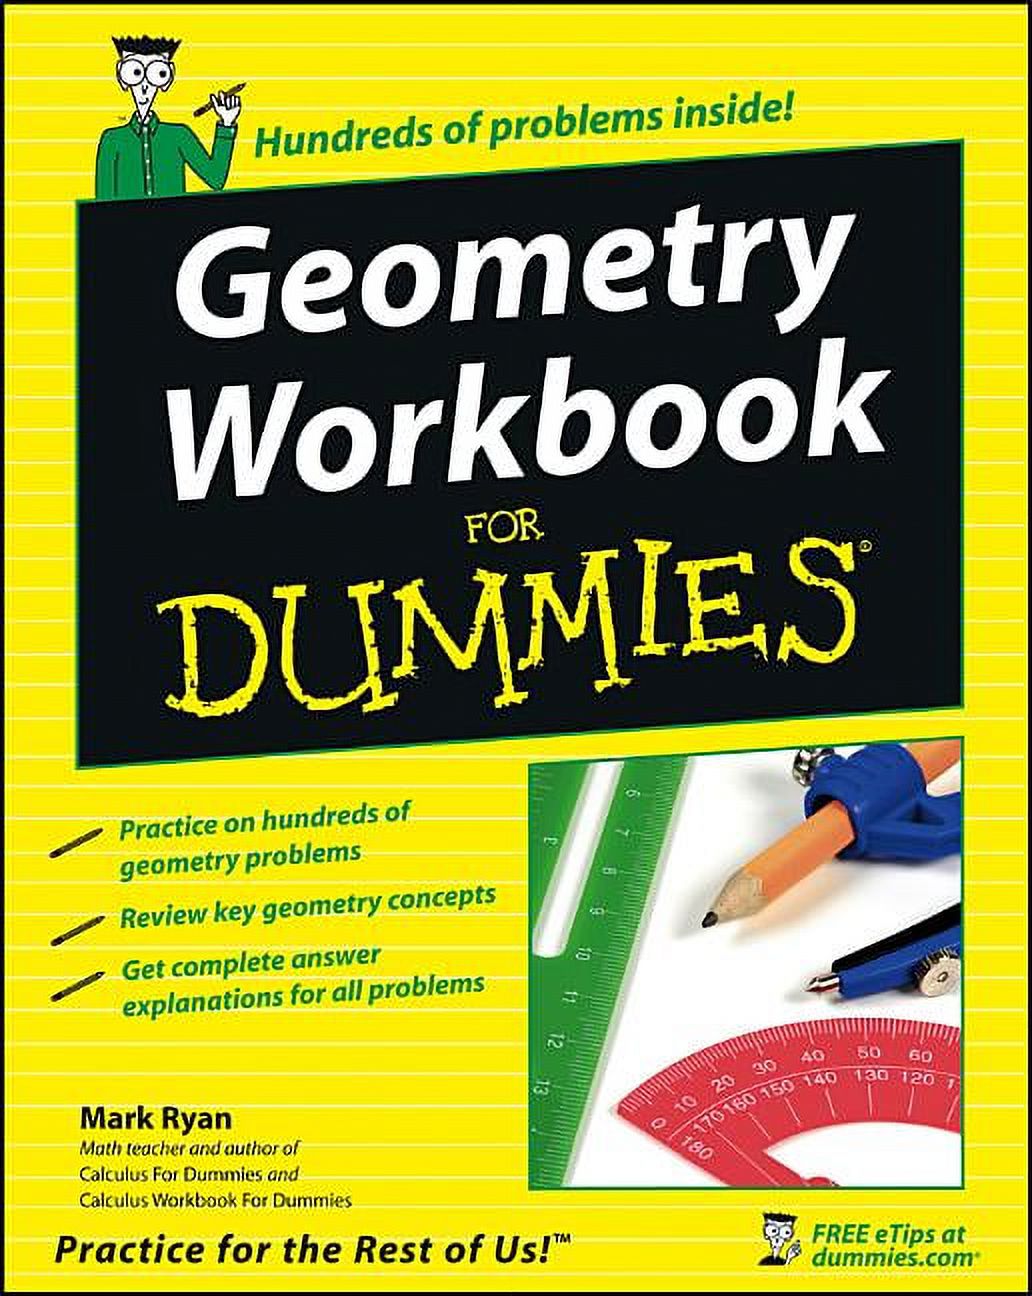 For Dummies: Geometry Workbook for Dummies (Paperback) - image 1 of 1